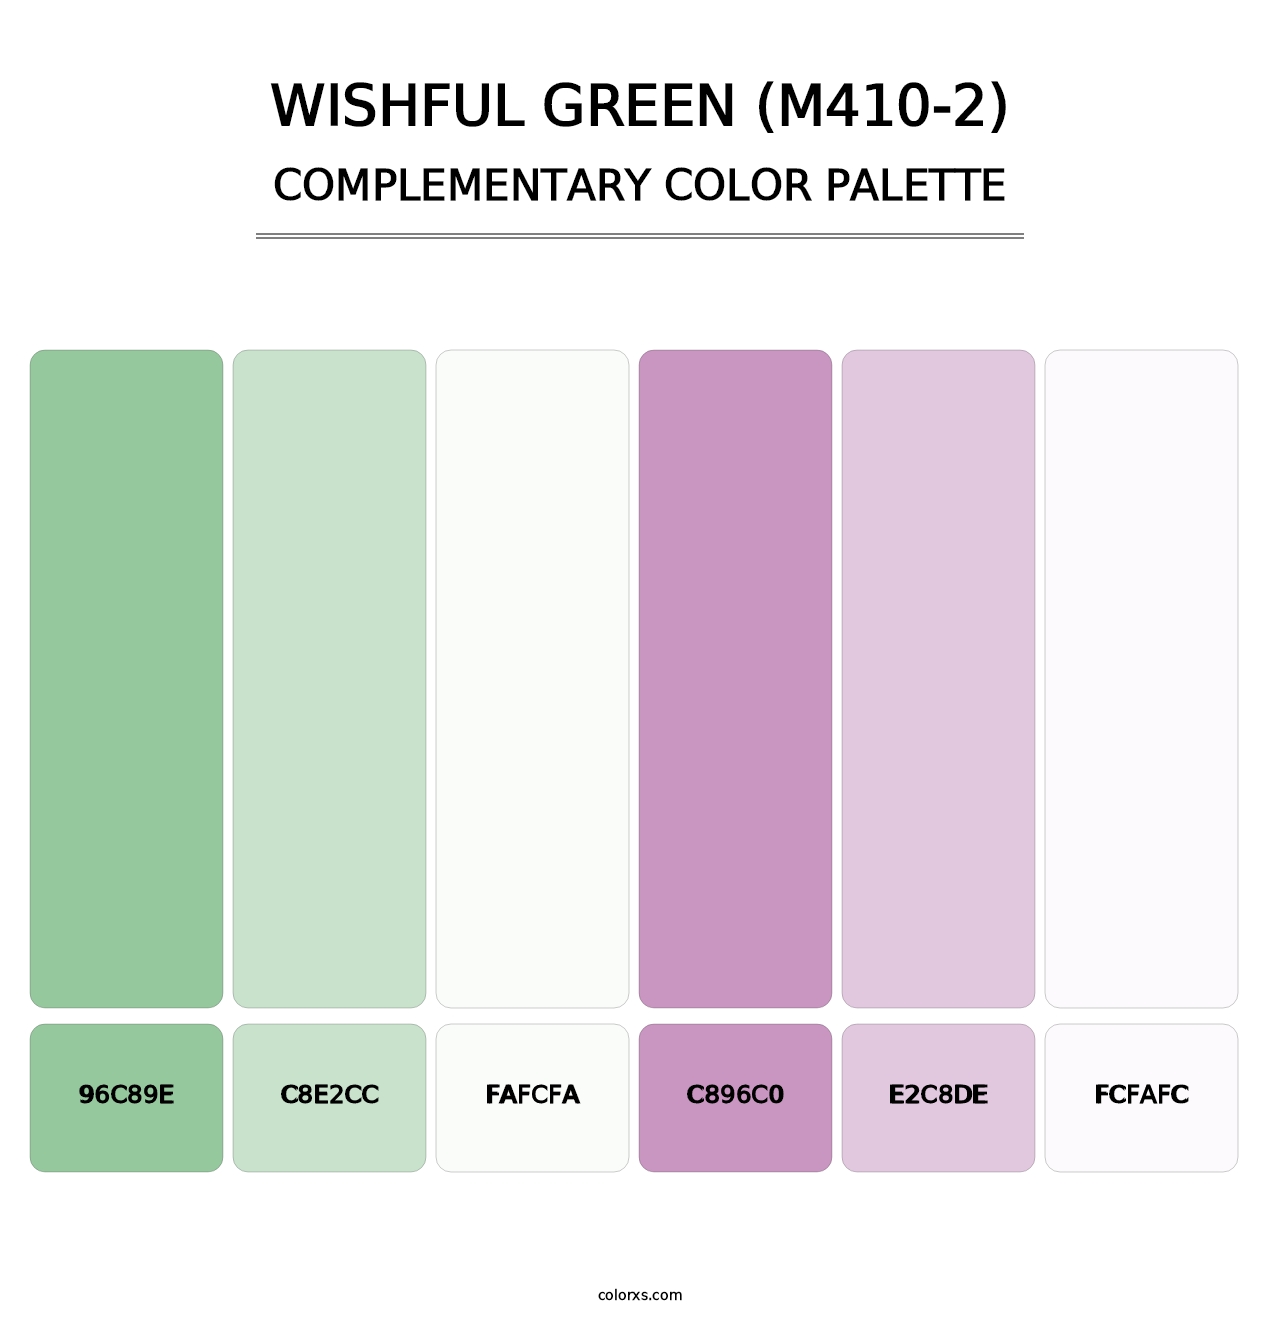 Wishful Green (M410-2) - Complementary Color Palette